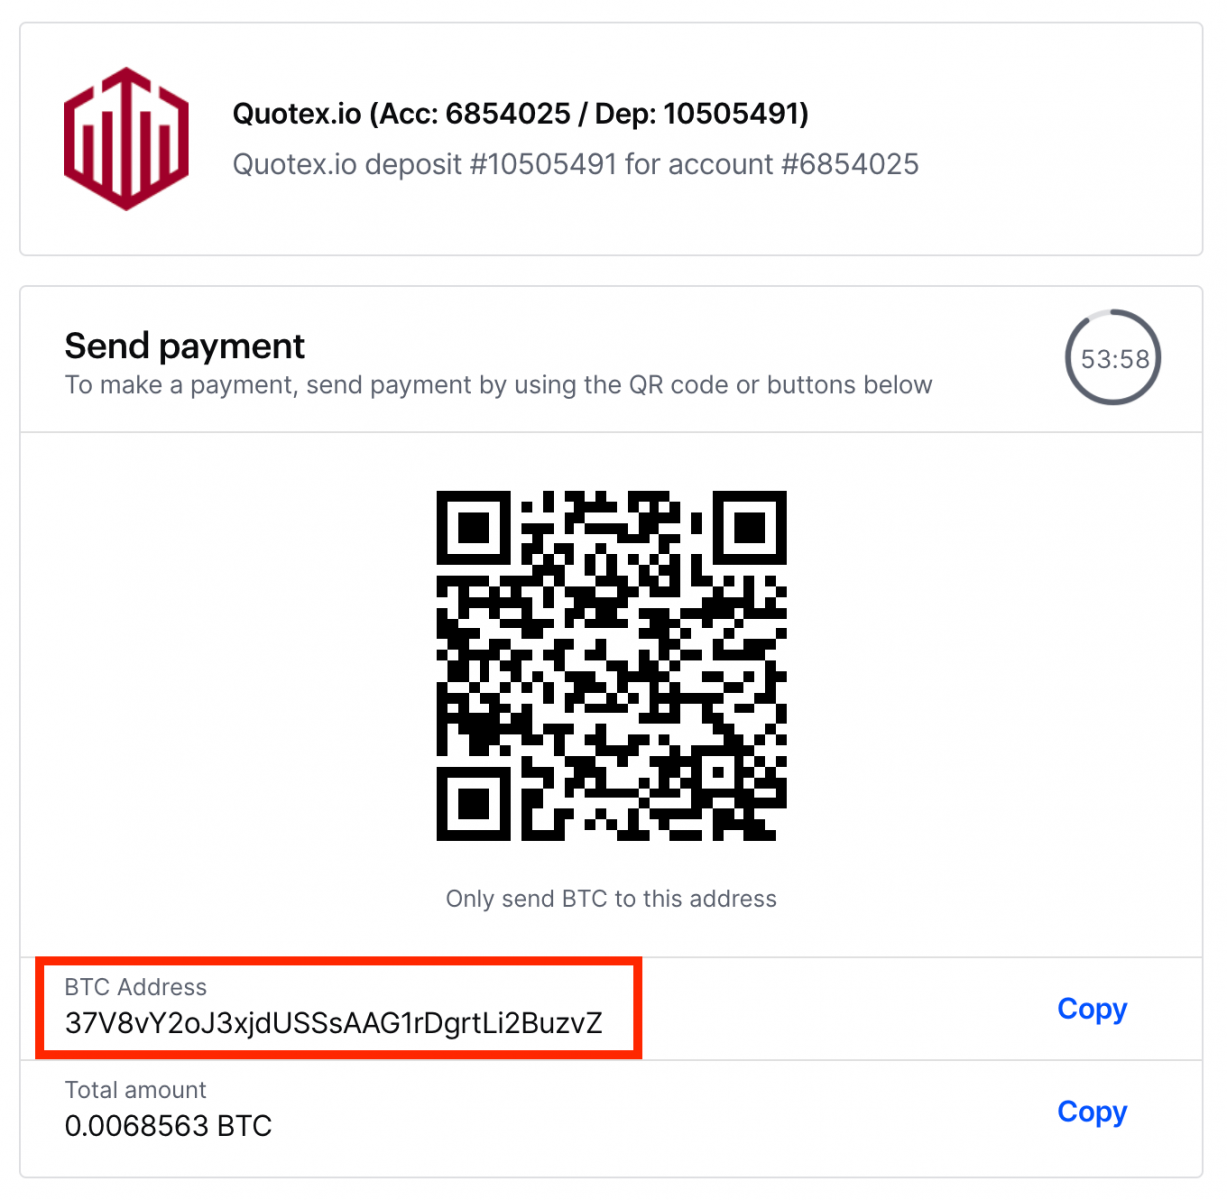 Deposit Money in Quotex via Philippines Bank Cards (Visa / MasterCard), Banks of the Philippines, E-payments (Perfect Money, PayMaya, GCash, GrabPay, Coins.ph) and Cryptocurrencies